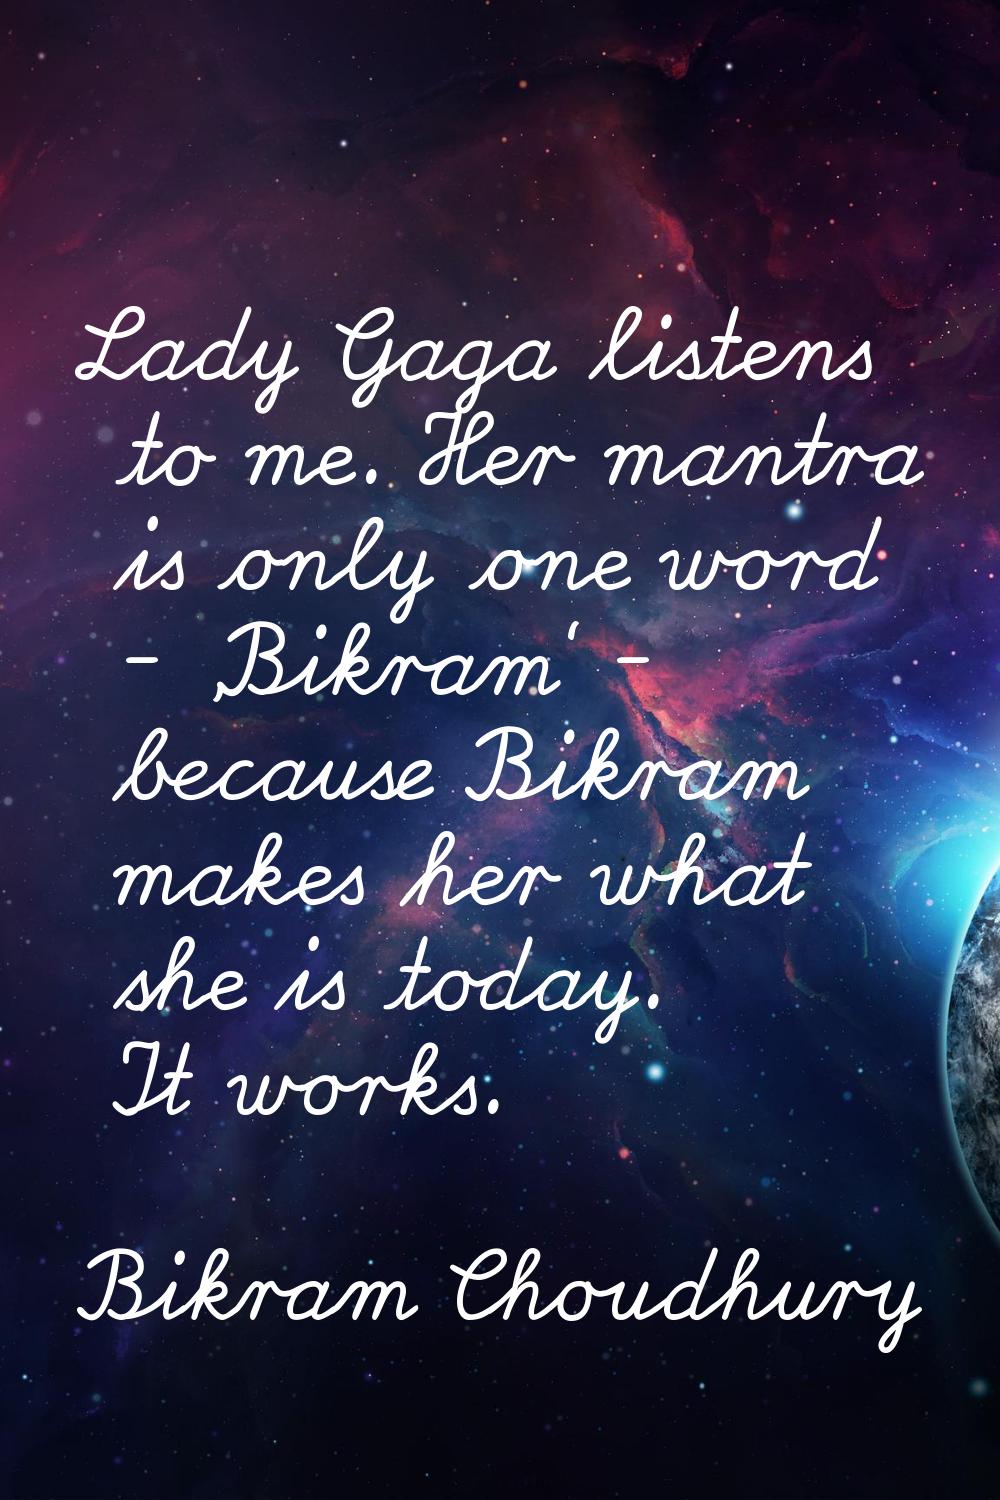 Lady Gaga listens to me. Her mantra is only one word - 'Bikram' - because Bikram makes her what she